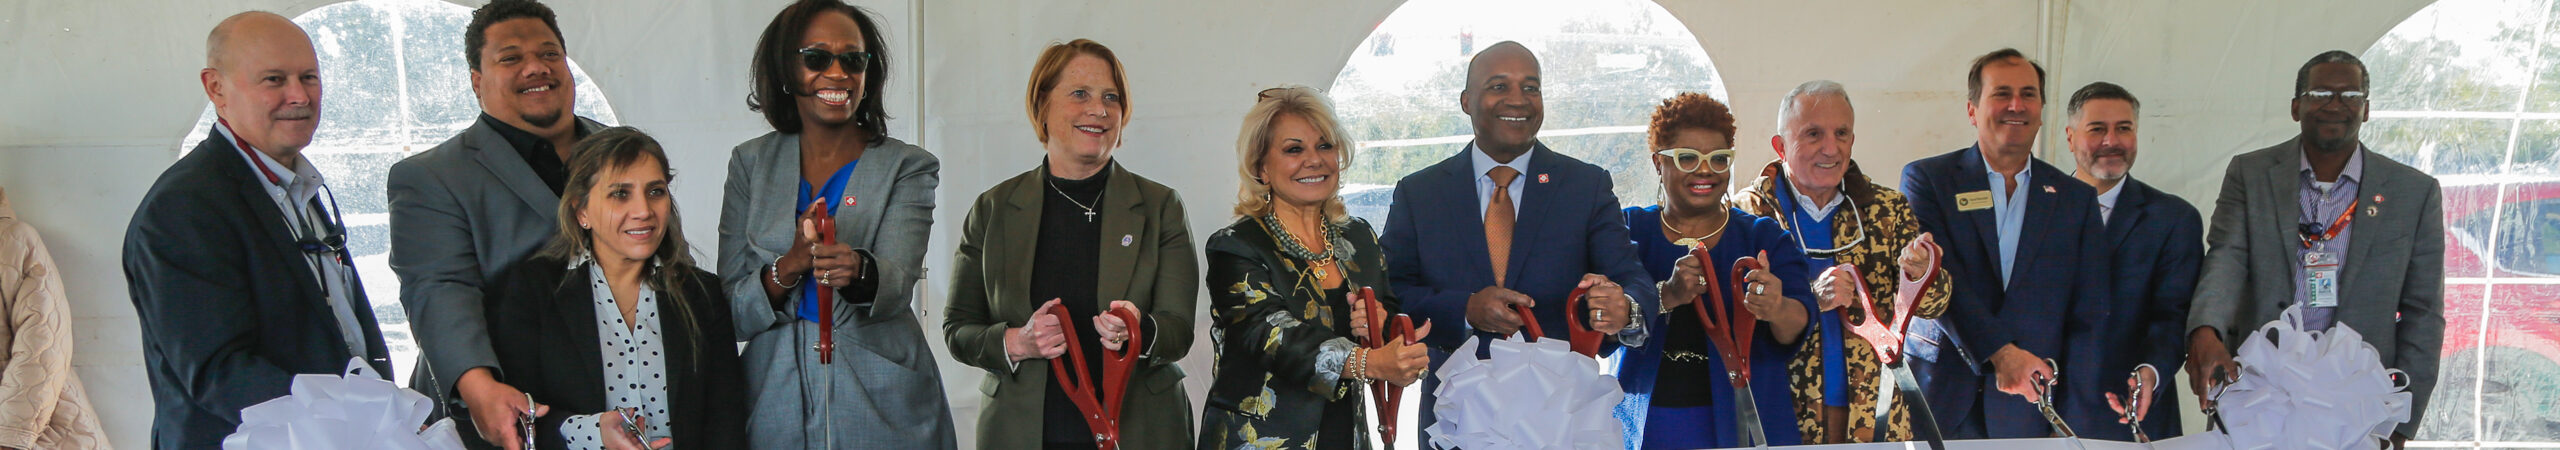 JTA – Ribbon Cutting for the Opening of Parramore Rd